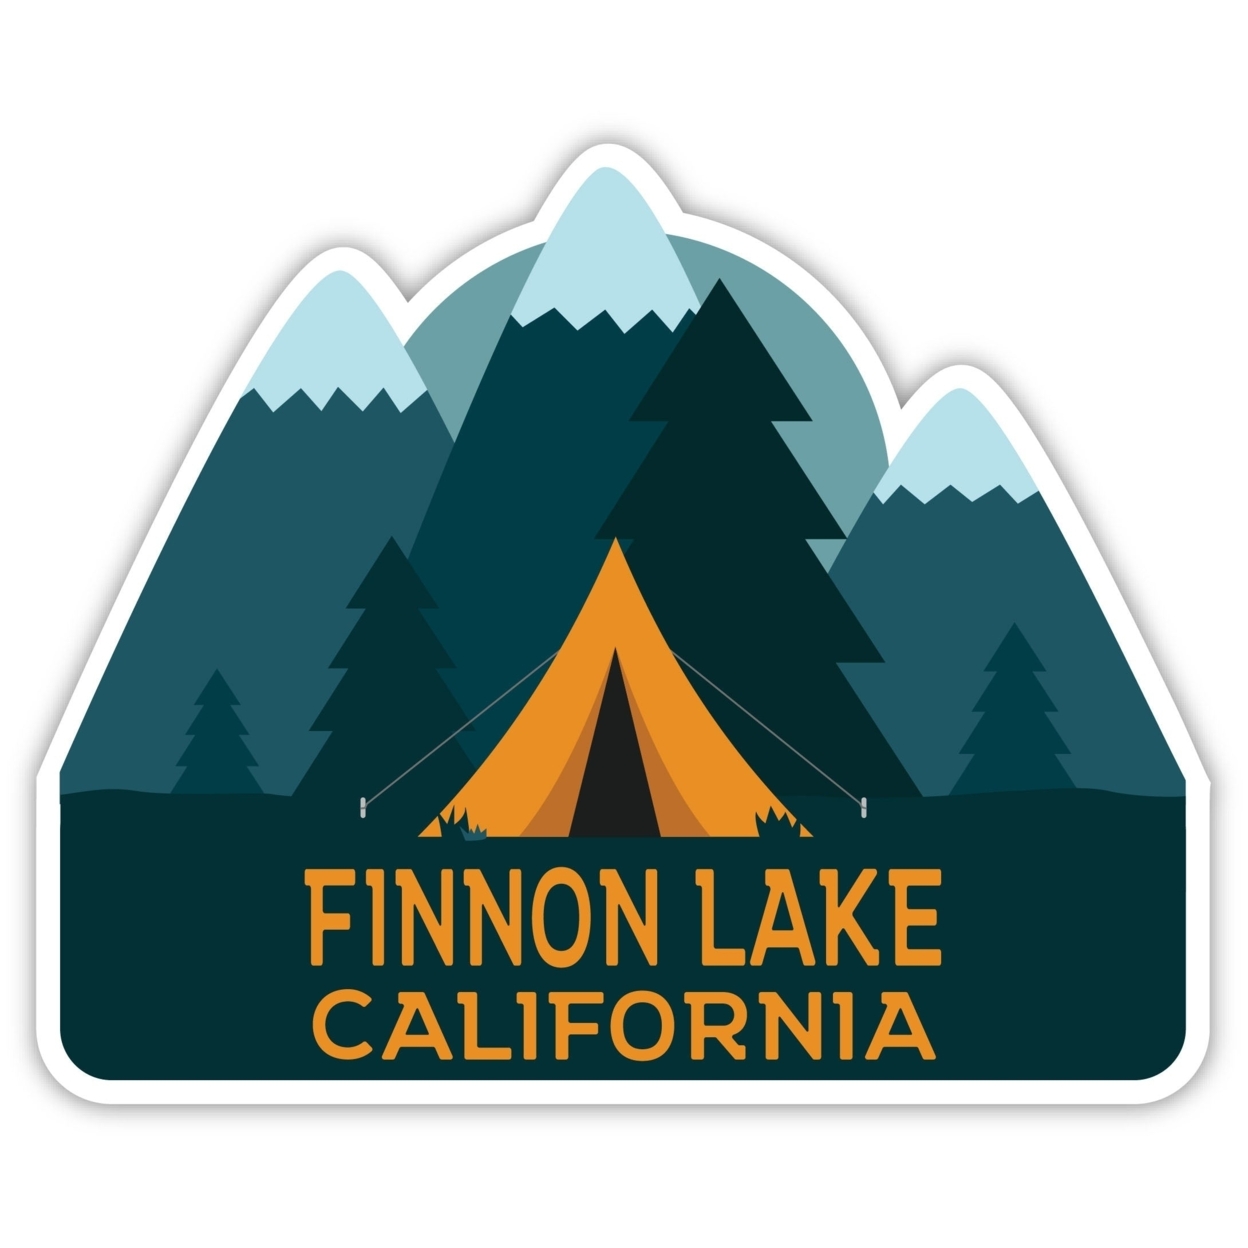 Finnon Lake California Souvenir Decorative Stickers (Choose Theme And Size) - 4-Pack, 2-Inch, Great Outdoors